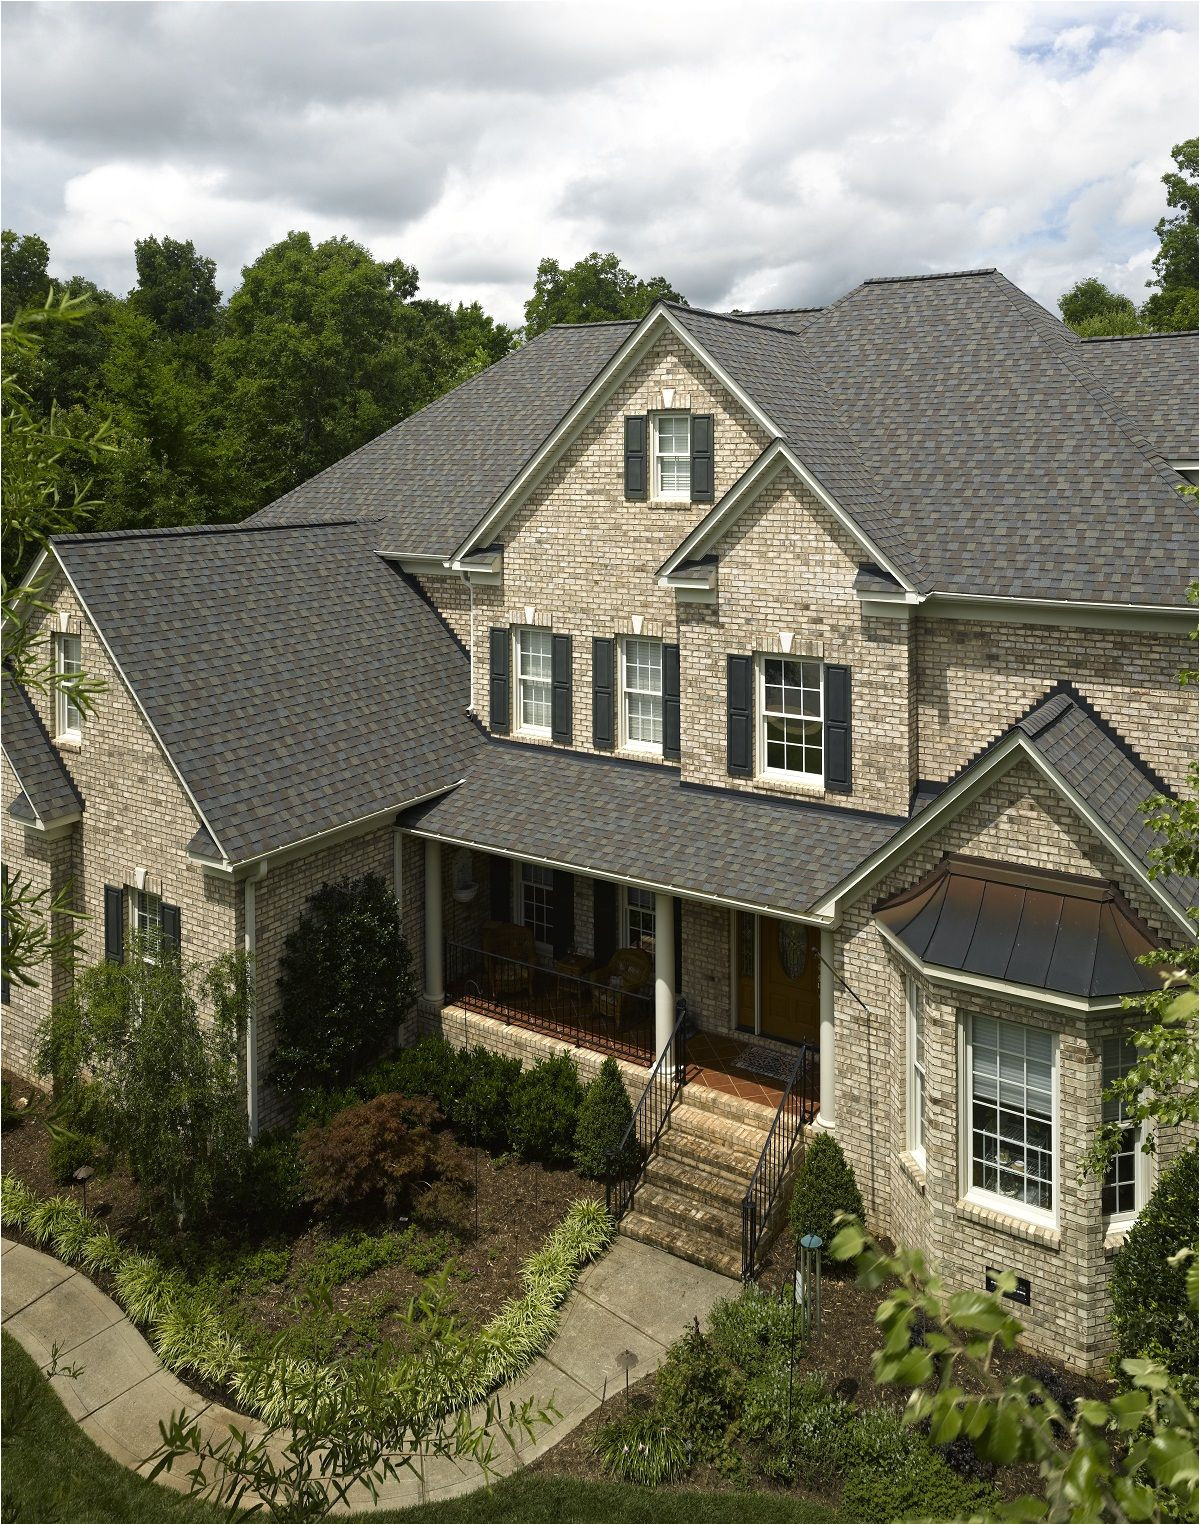 Certainteed Landmark Colonial Slate Color Roofing Photo Gallery Certainteed Design Center Grand Manor